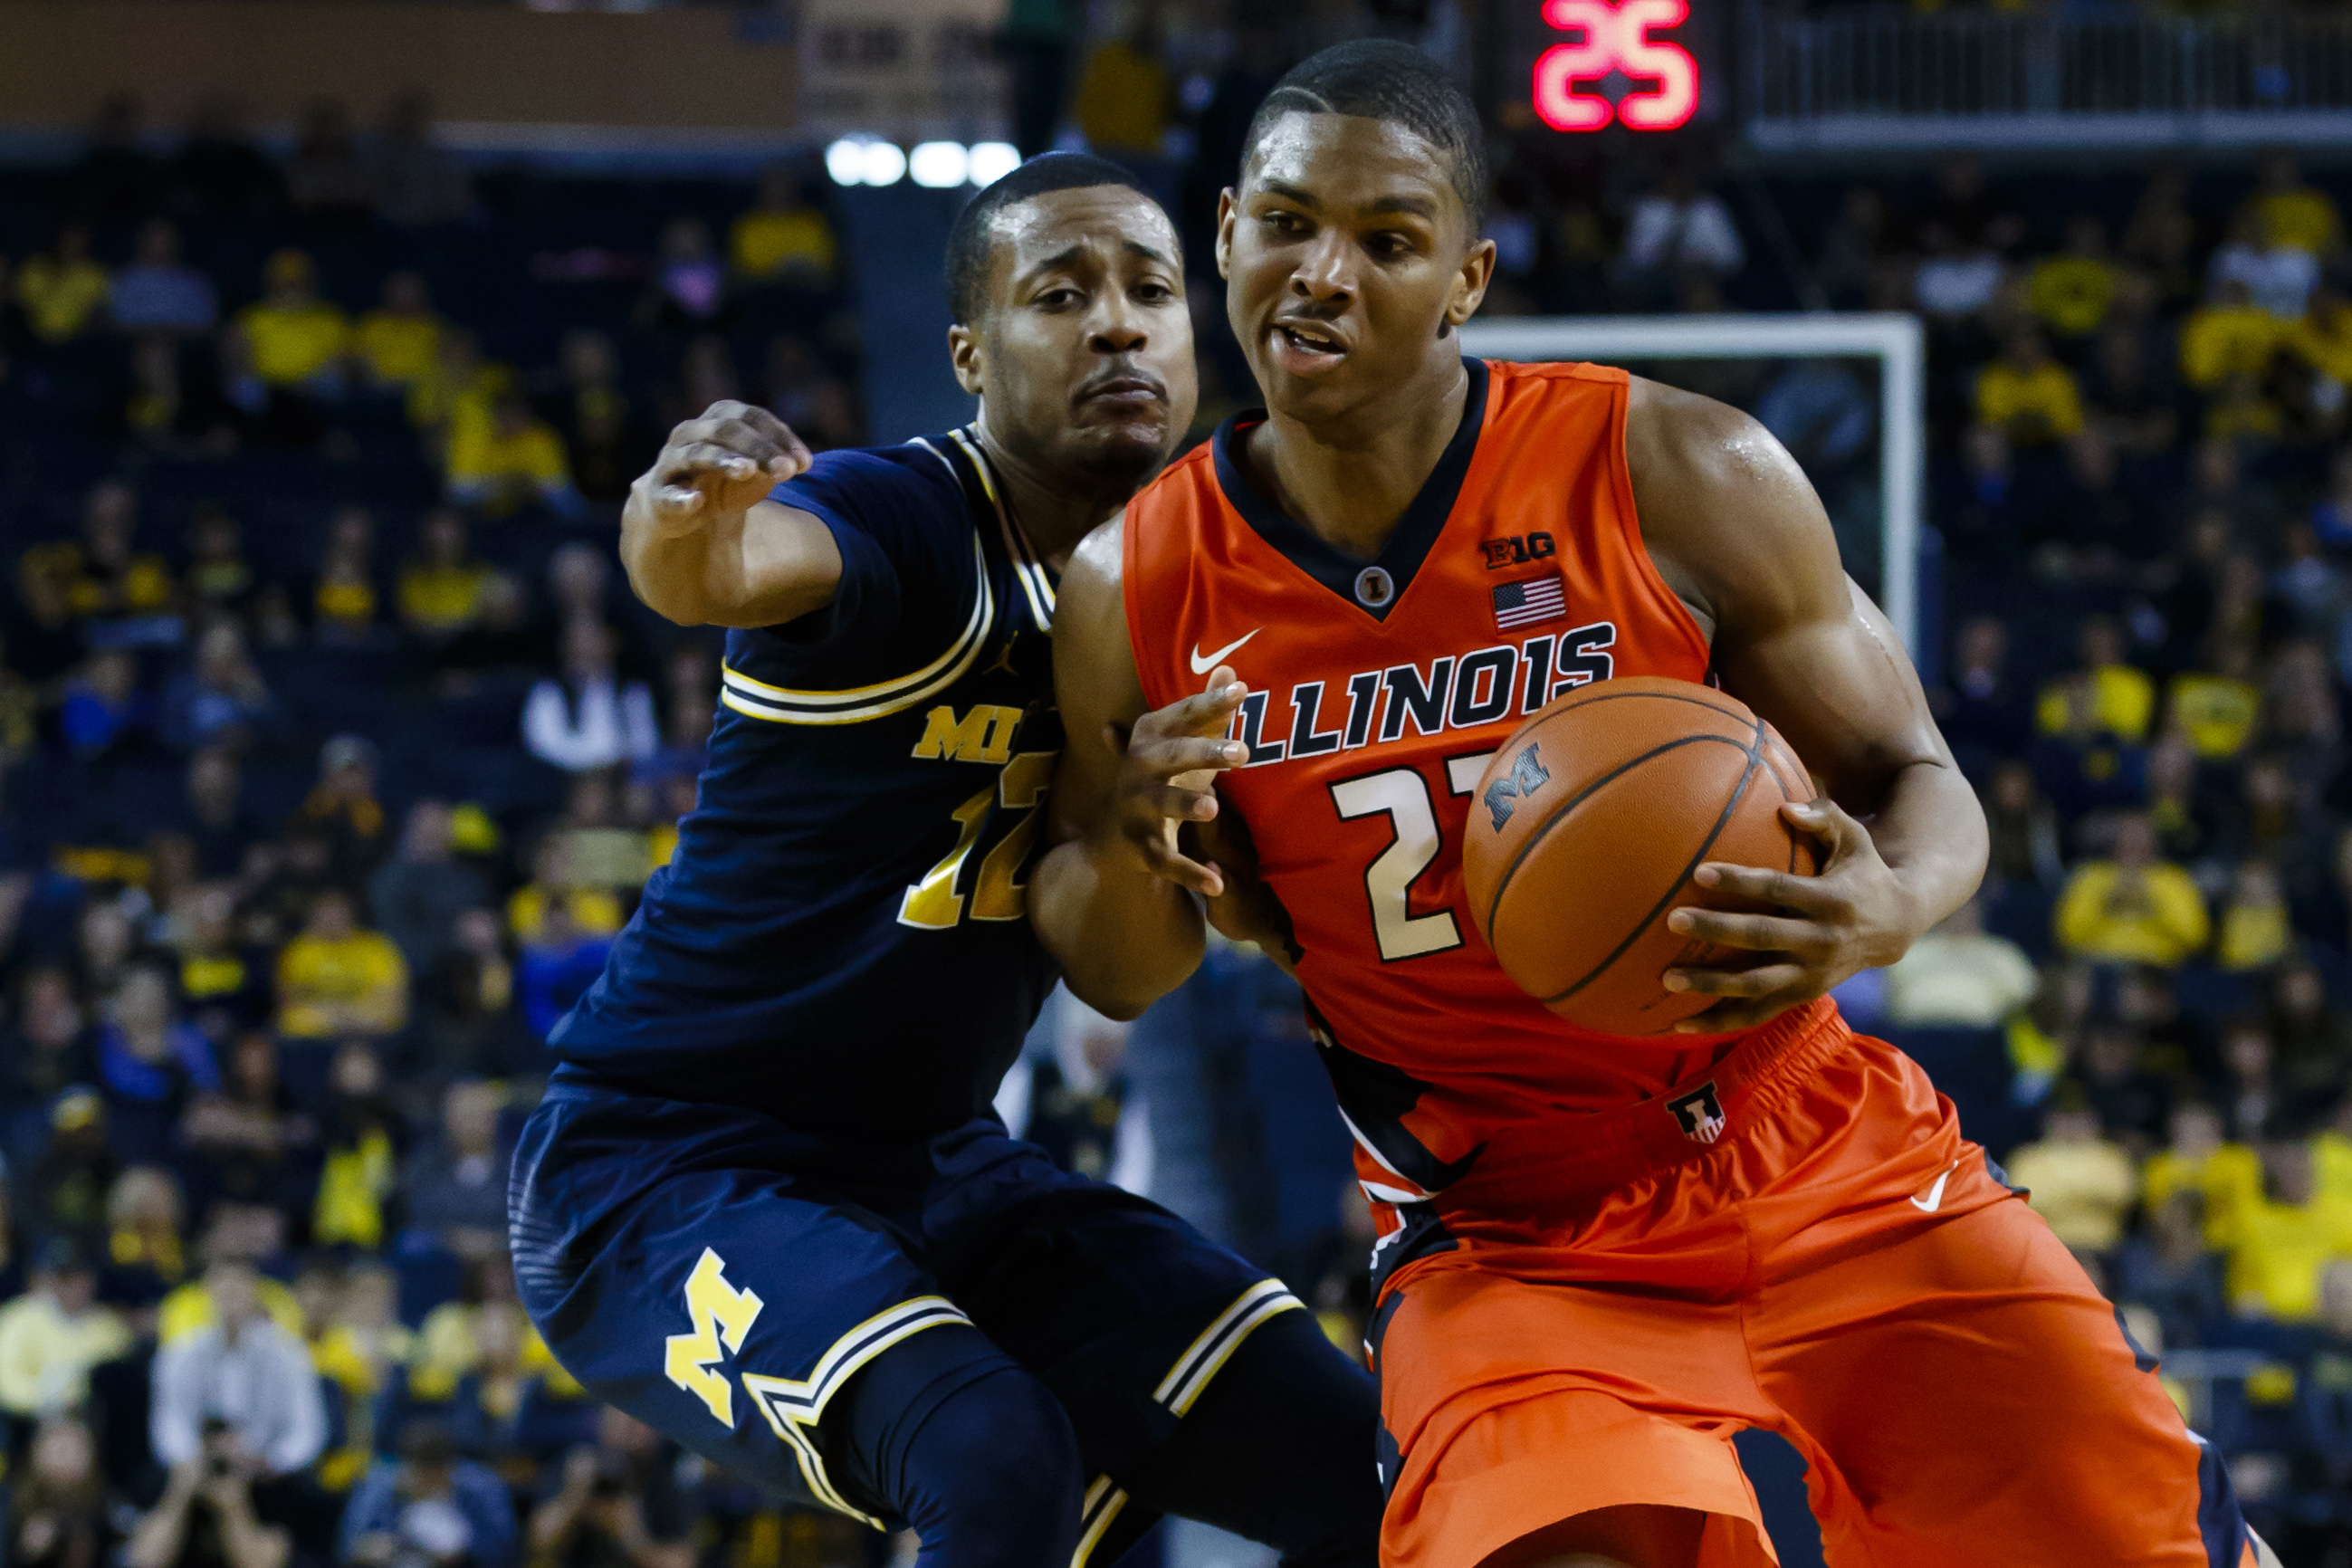 Illinois Basketball: 3 Observations From the Michigan Loss